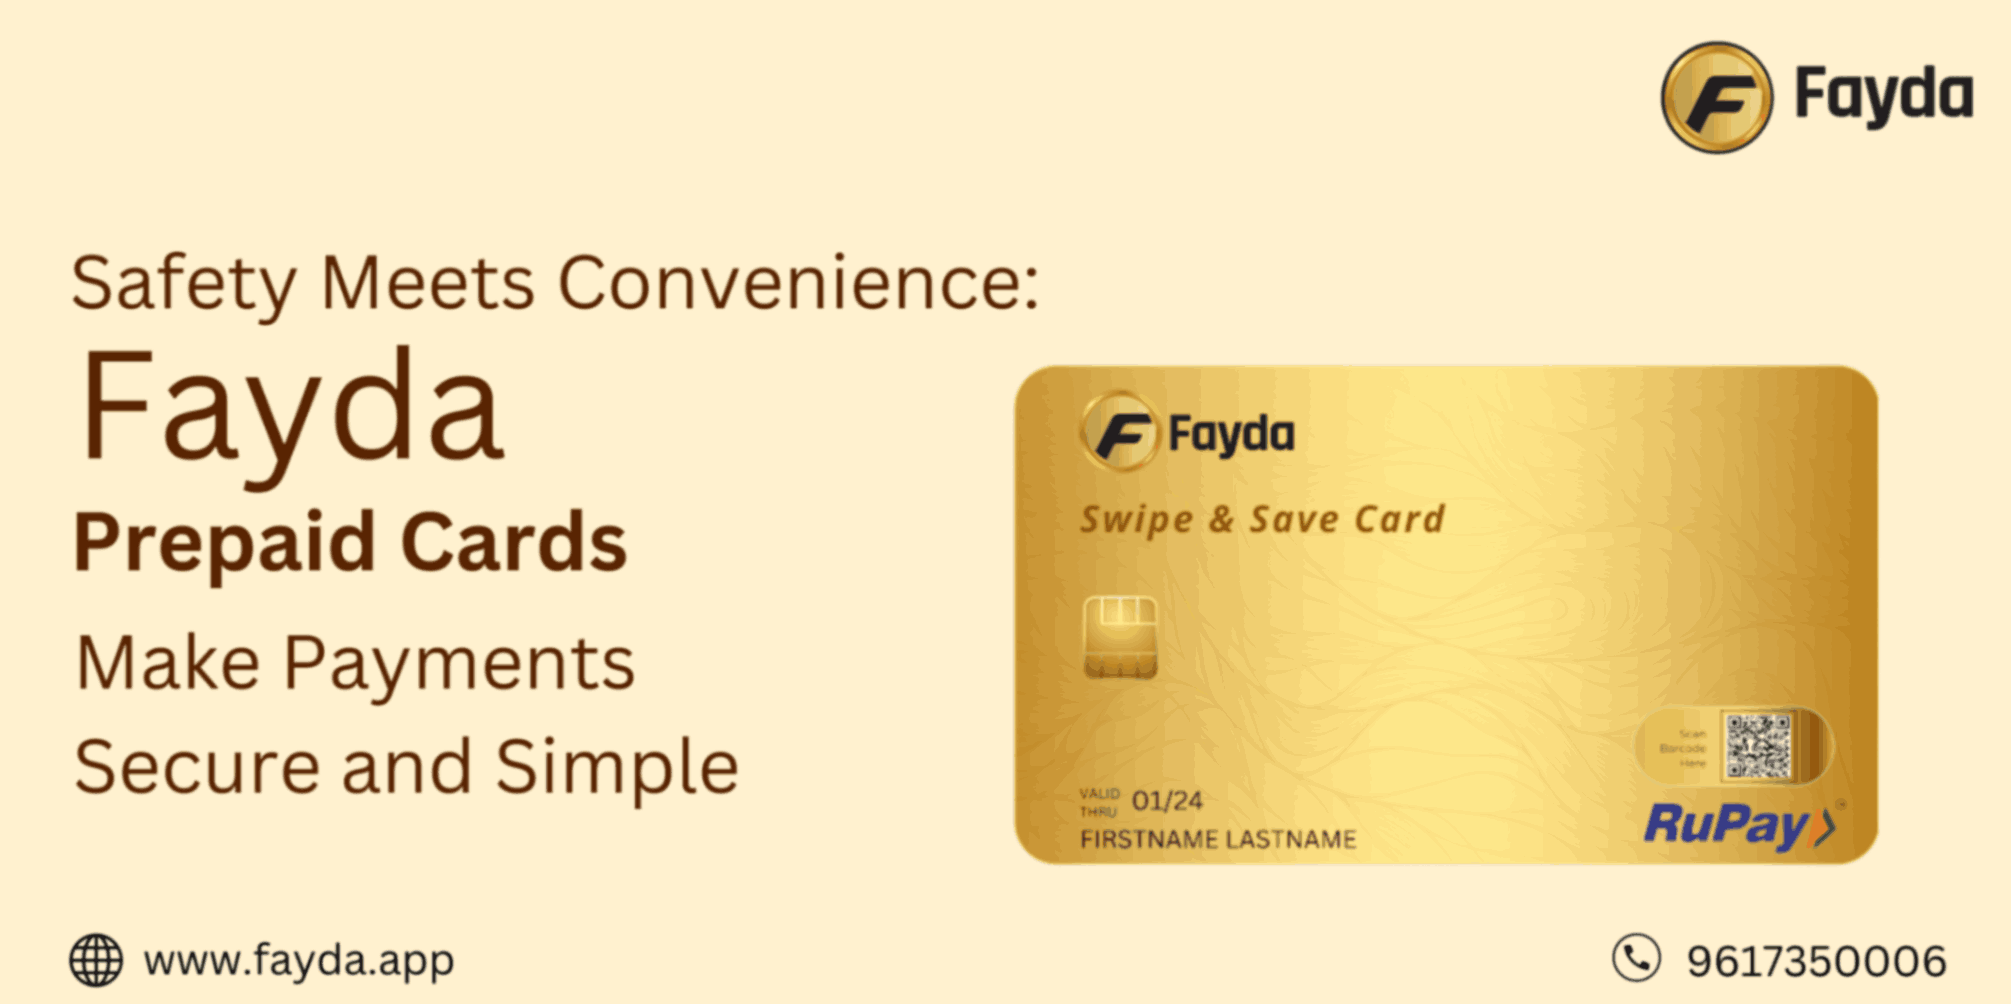 Safety Meets Convenience: How Fayda Prepaid Cards Make Payments Secure and Simple